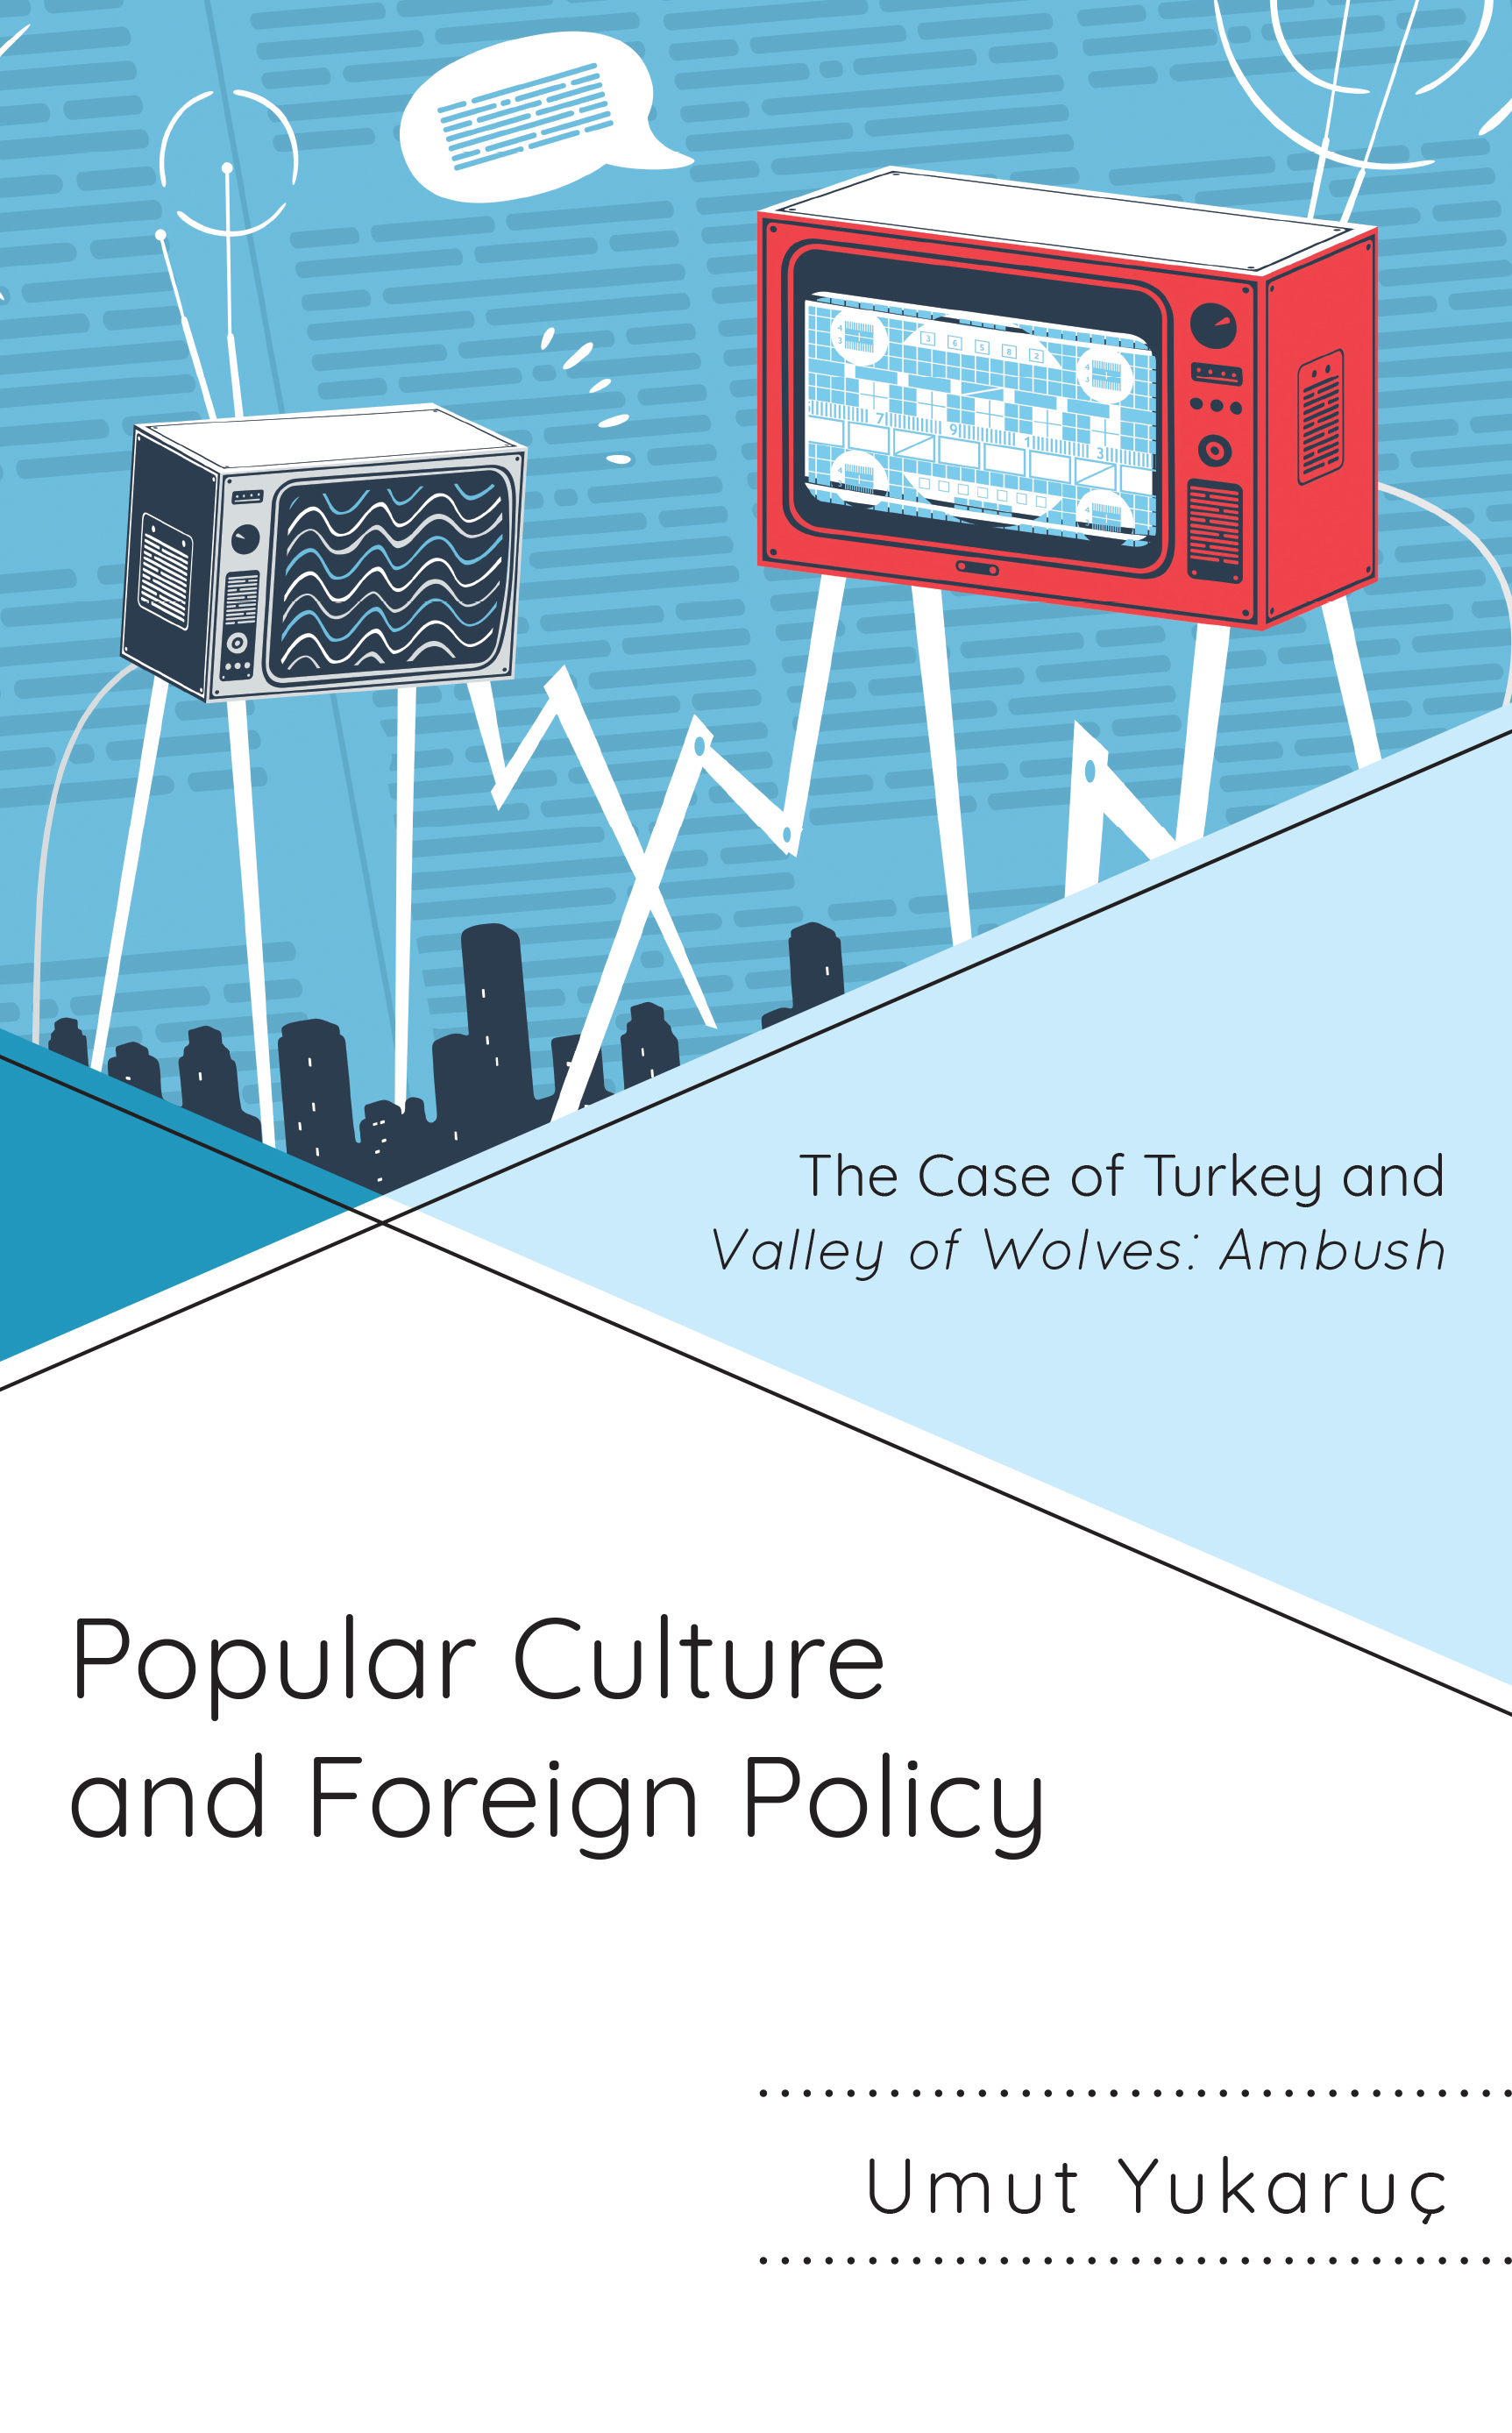 Popular Culture and Foreign Policy: The Case of Turkey and Valley of Wolves: Ambush